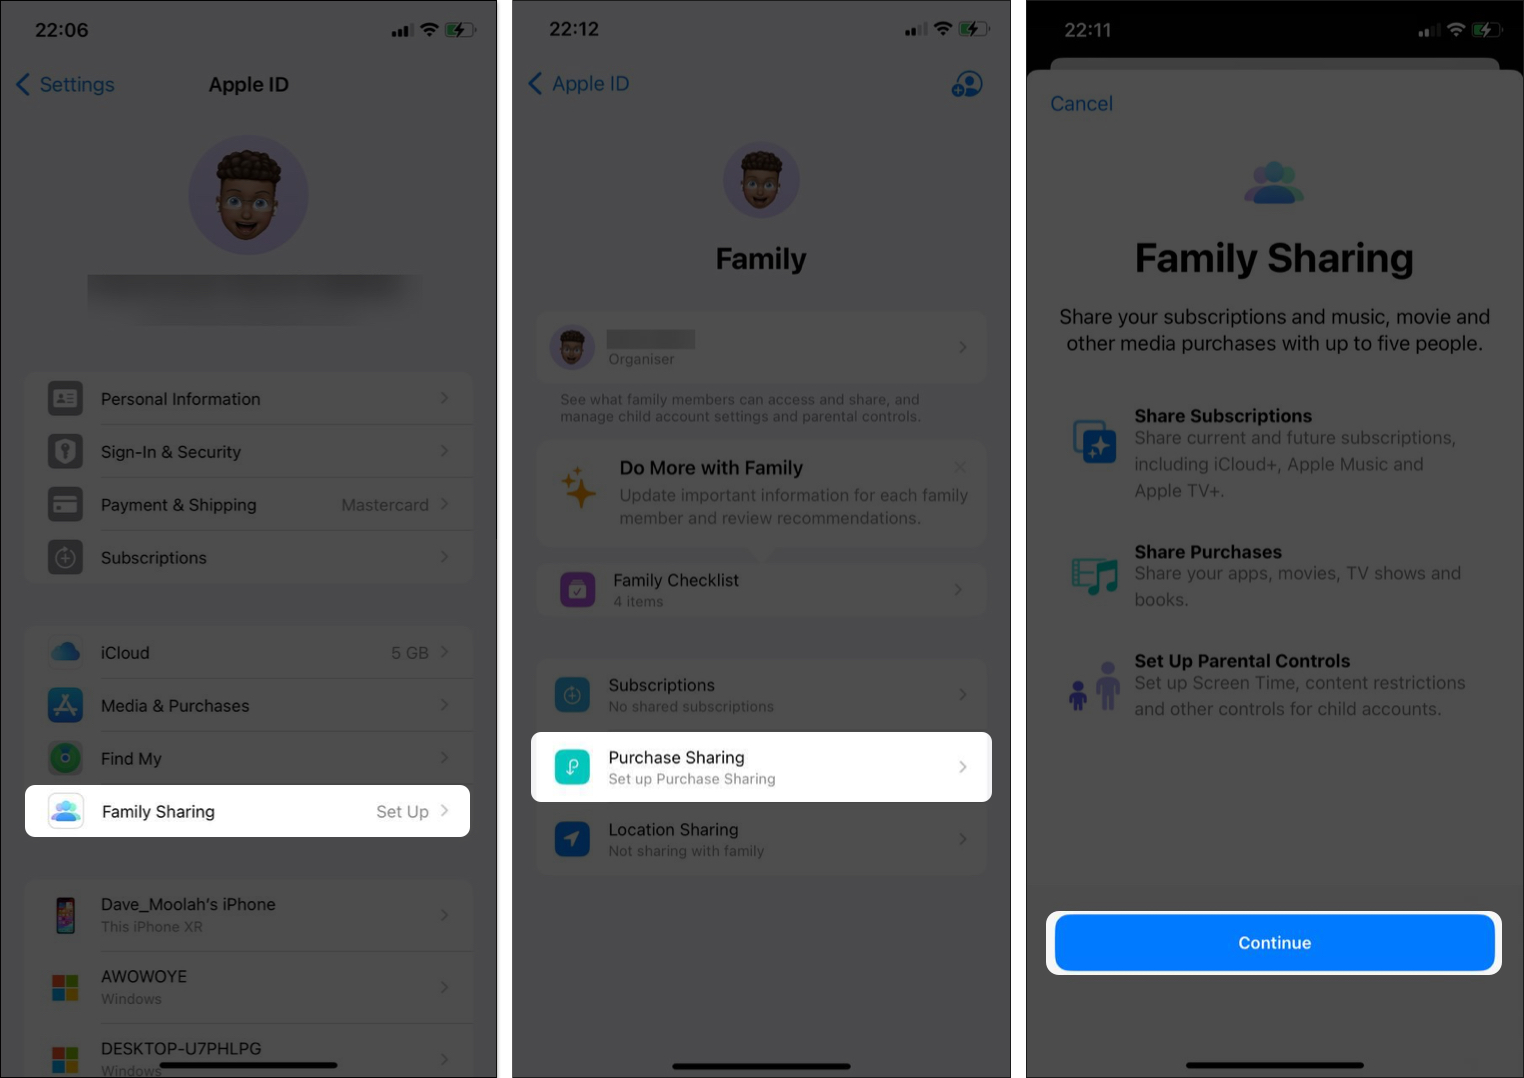 Family Sharing page in iPhone Settings app.